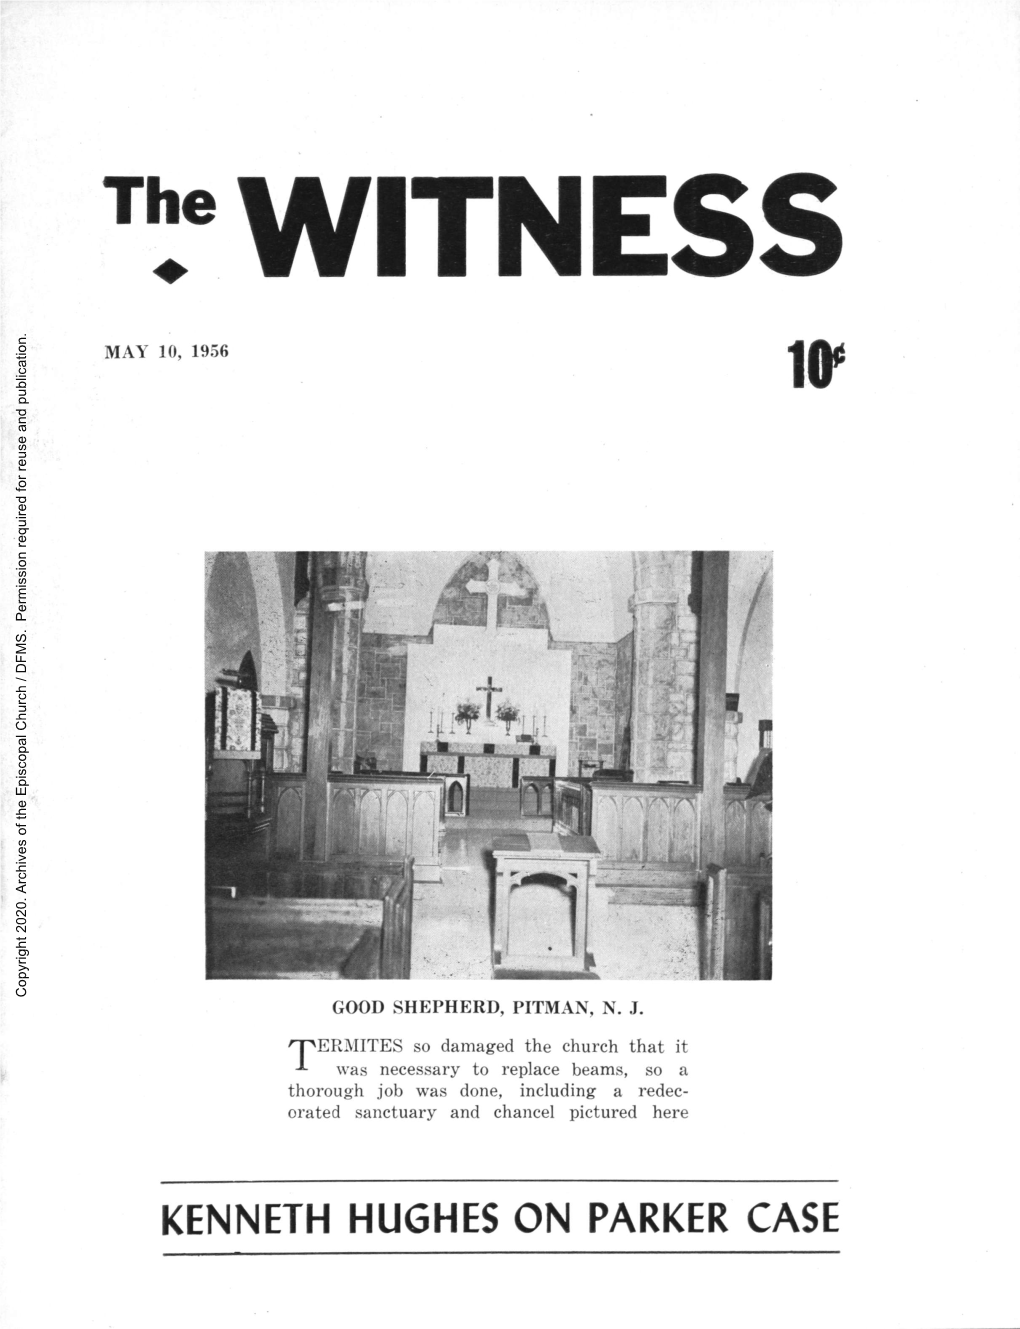 1956 the Witness, Vol. 43, No. 16